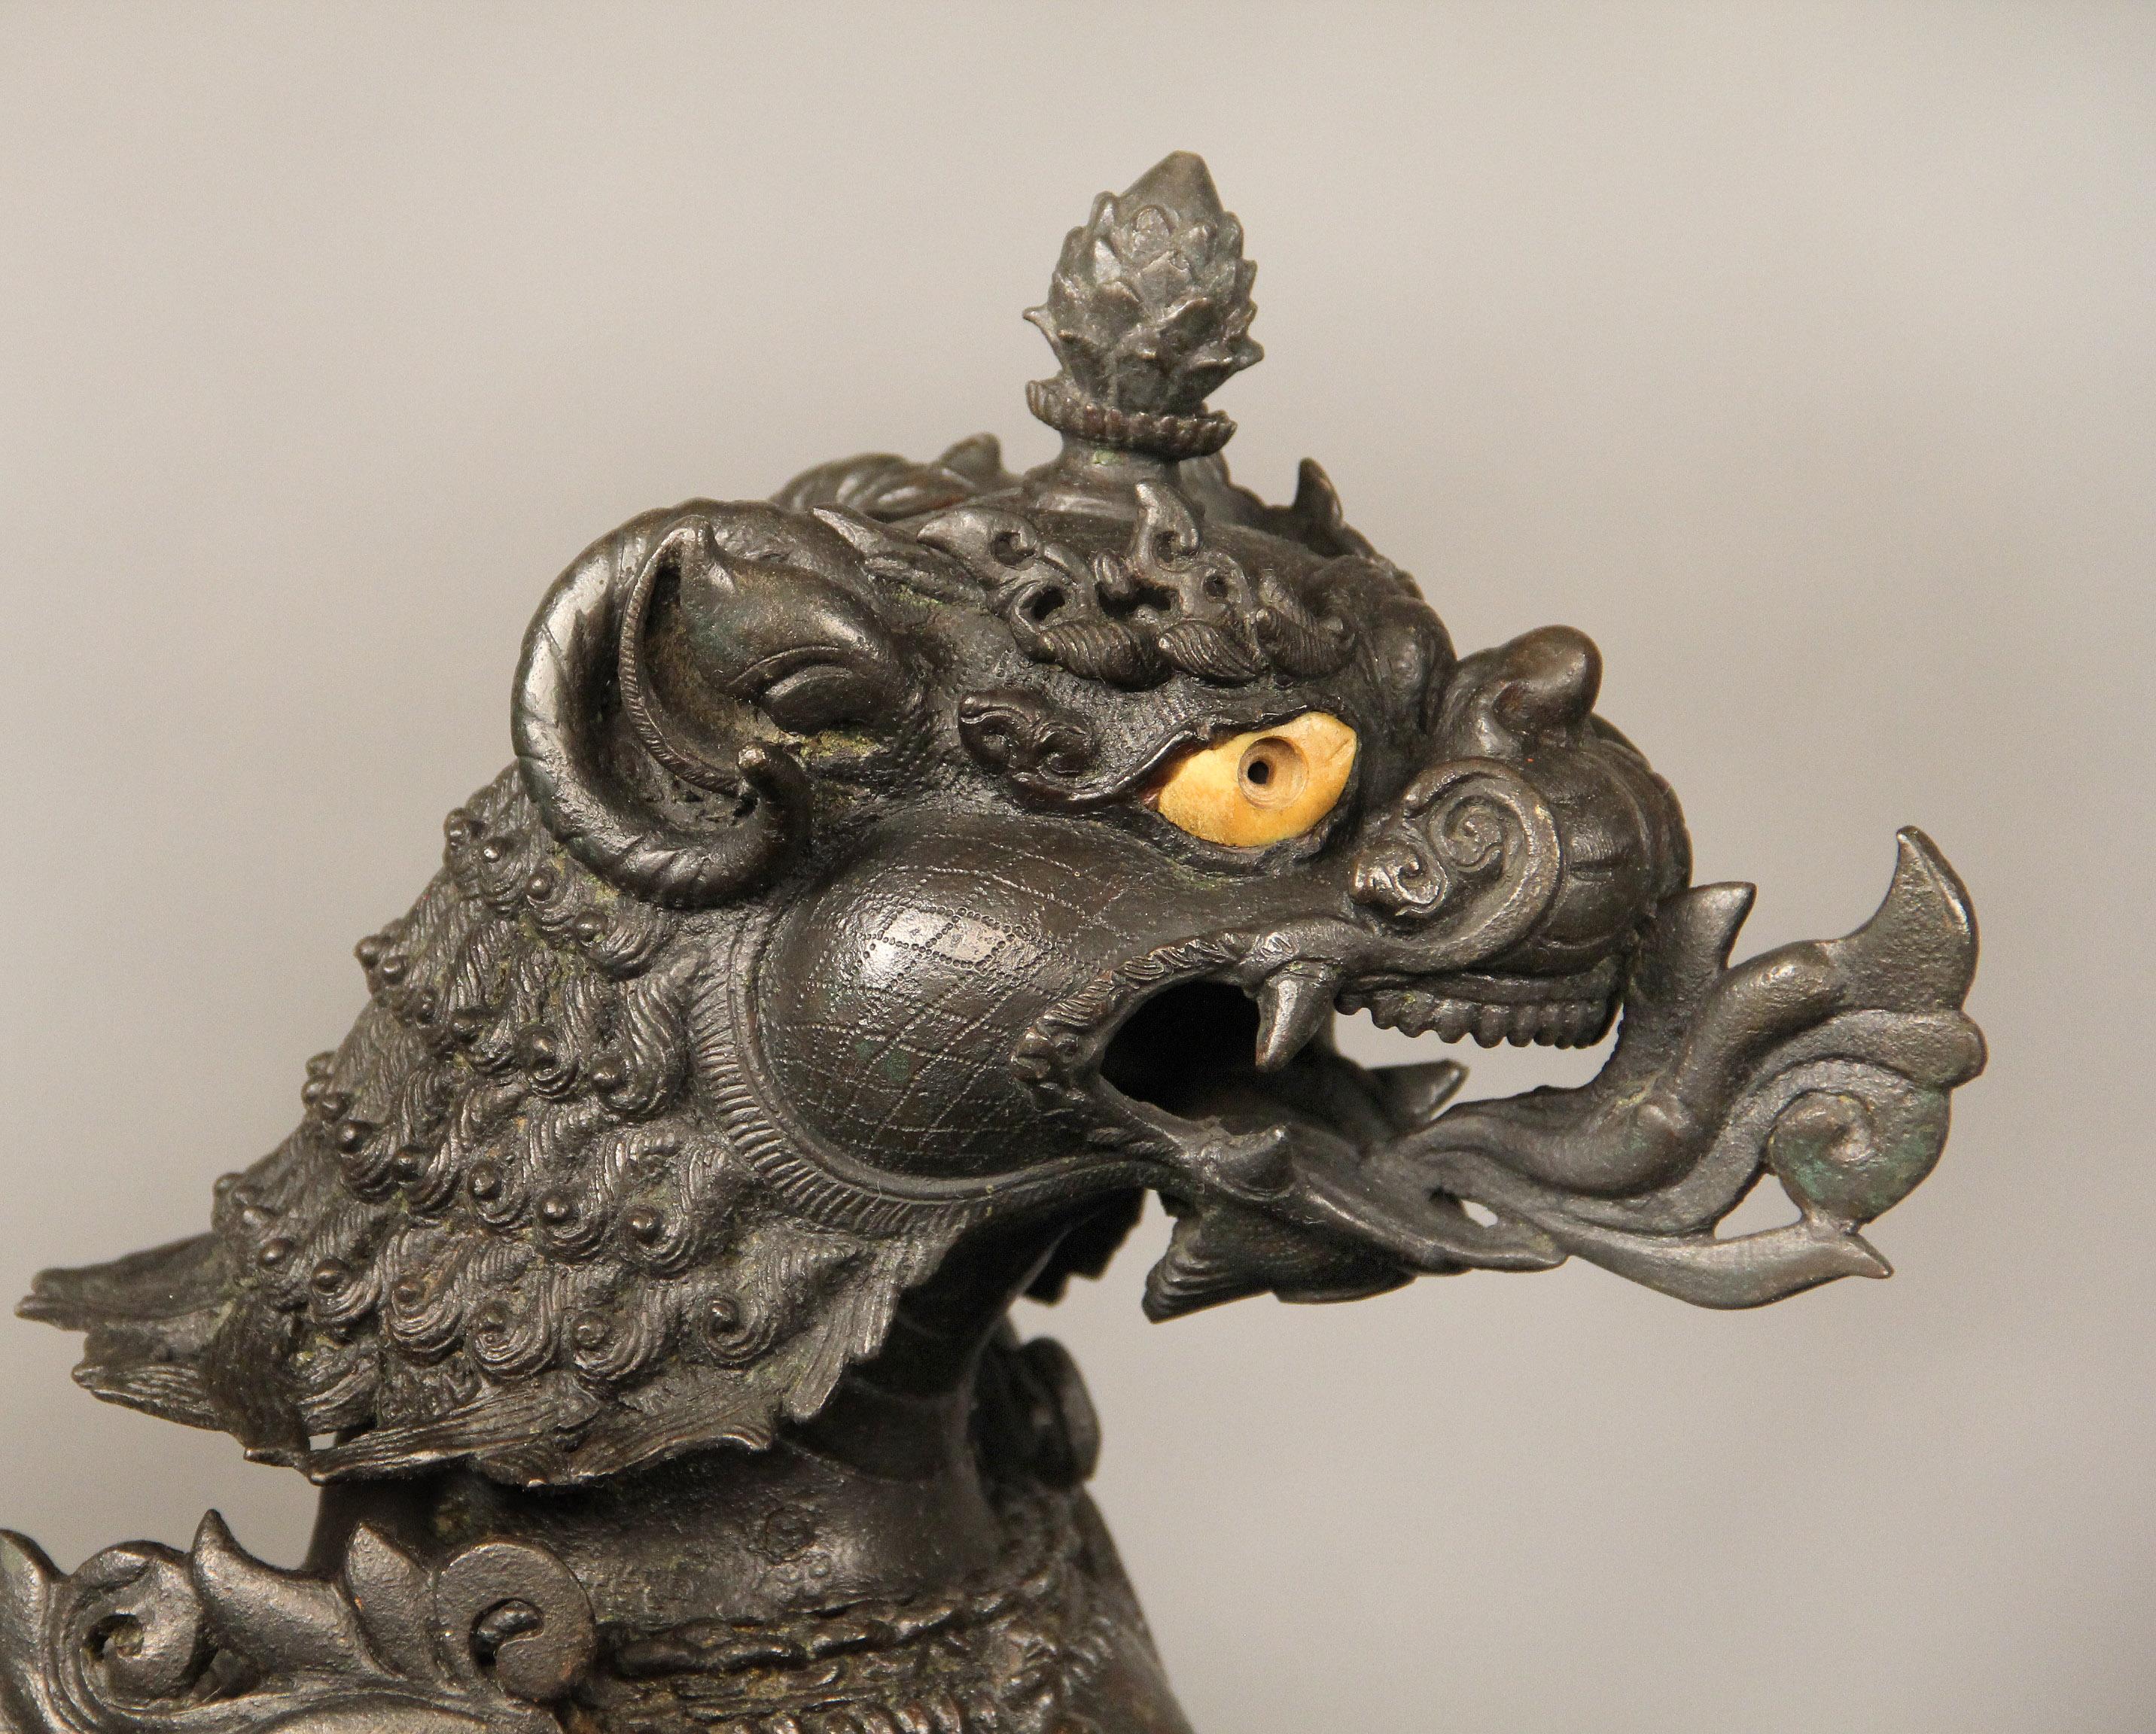 A fine quality pair of late 19th-early 20th century Chinese iron foo dog dragons.

Each dragon dressed in a helmet and full armour, breathing fire.